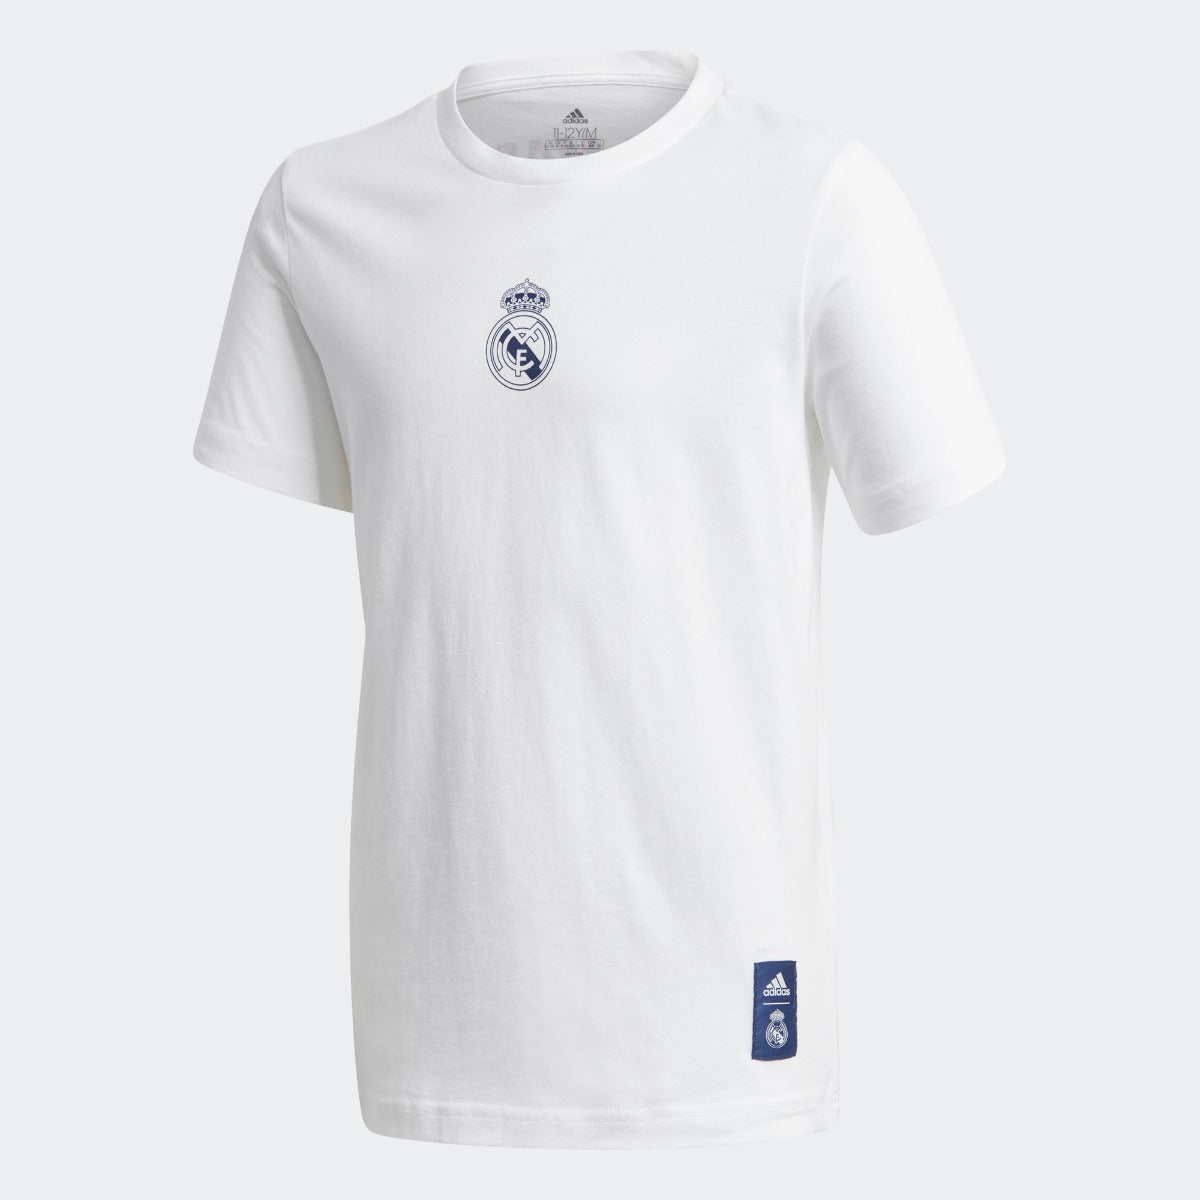 Adidas 2020-21 Real Madrid Youth Graphic Tee - White-Navy